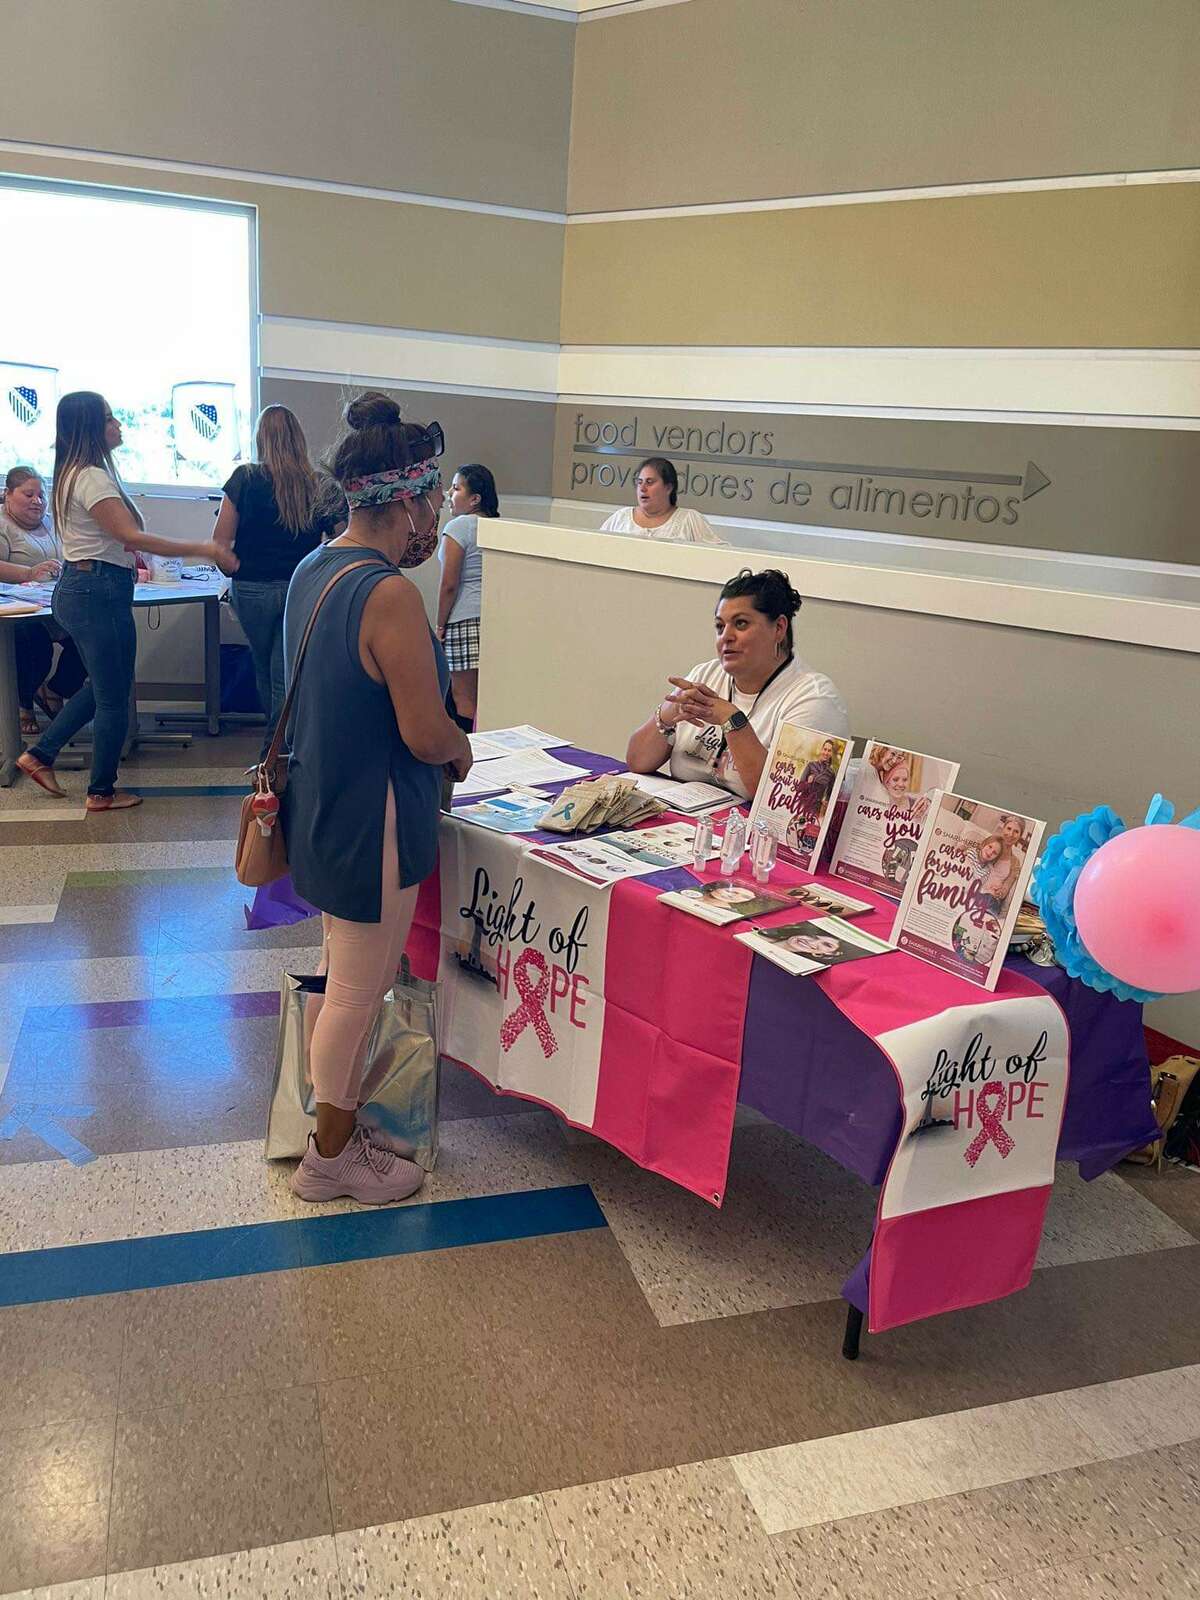 Images from the "Women's Health & Wellness Expo" held on evening Tuesday May 31, 2022 as part of the International Day for Women's Health. Women shopped around as they look for what services and resources are offered in the community. 